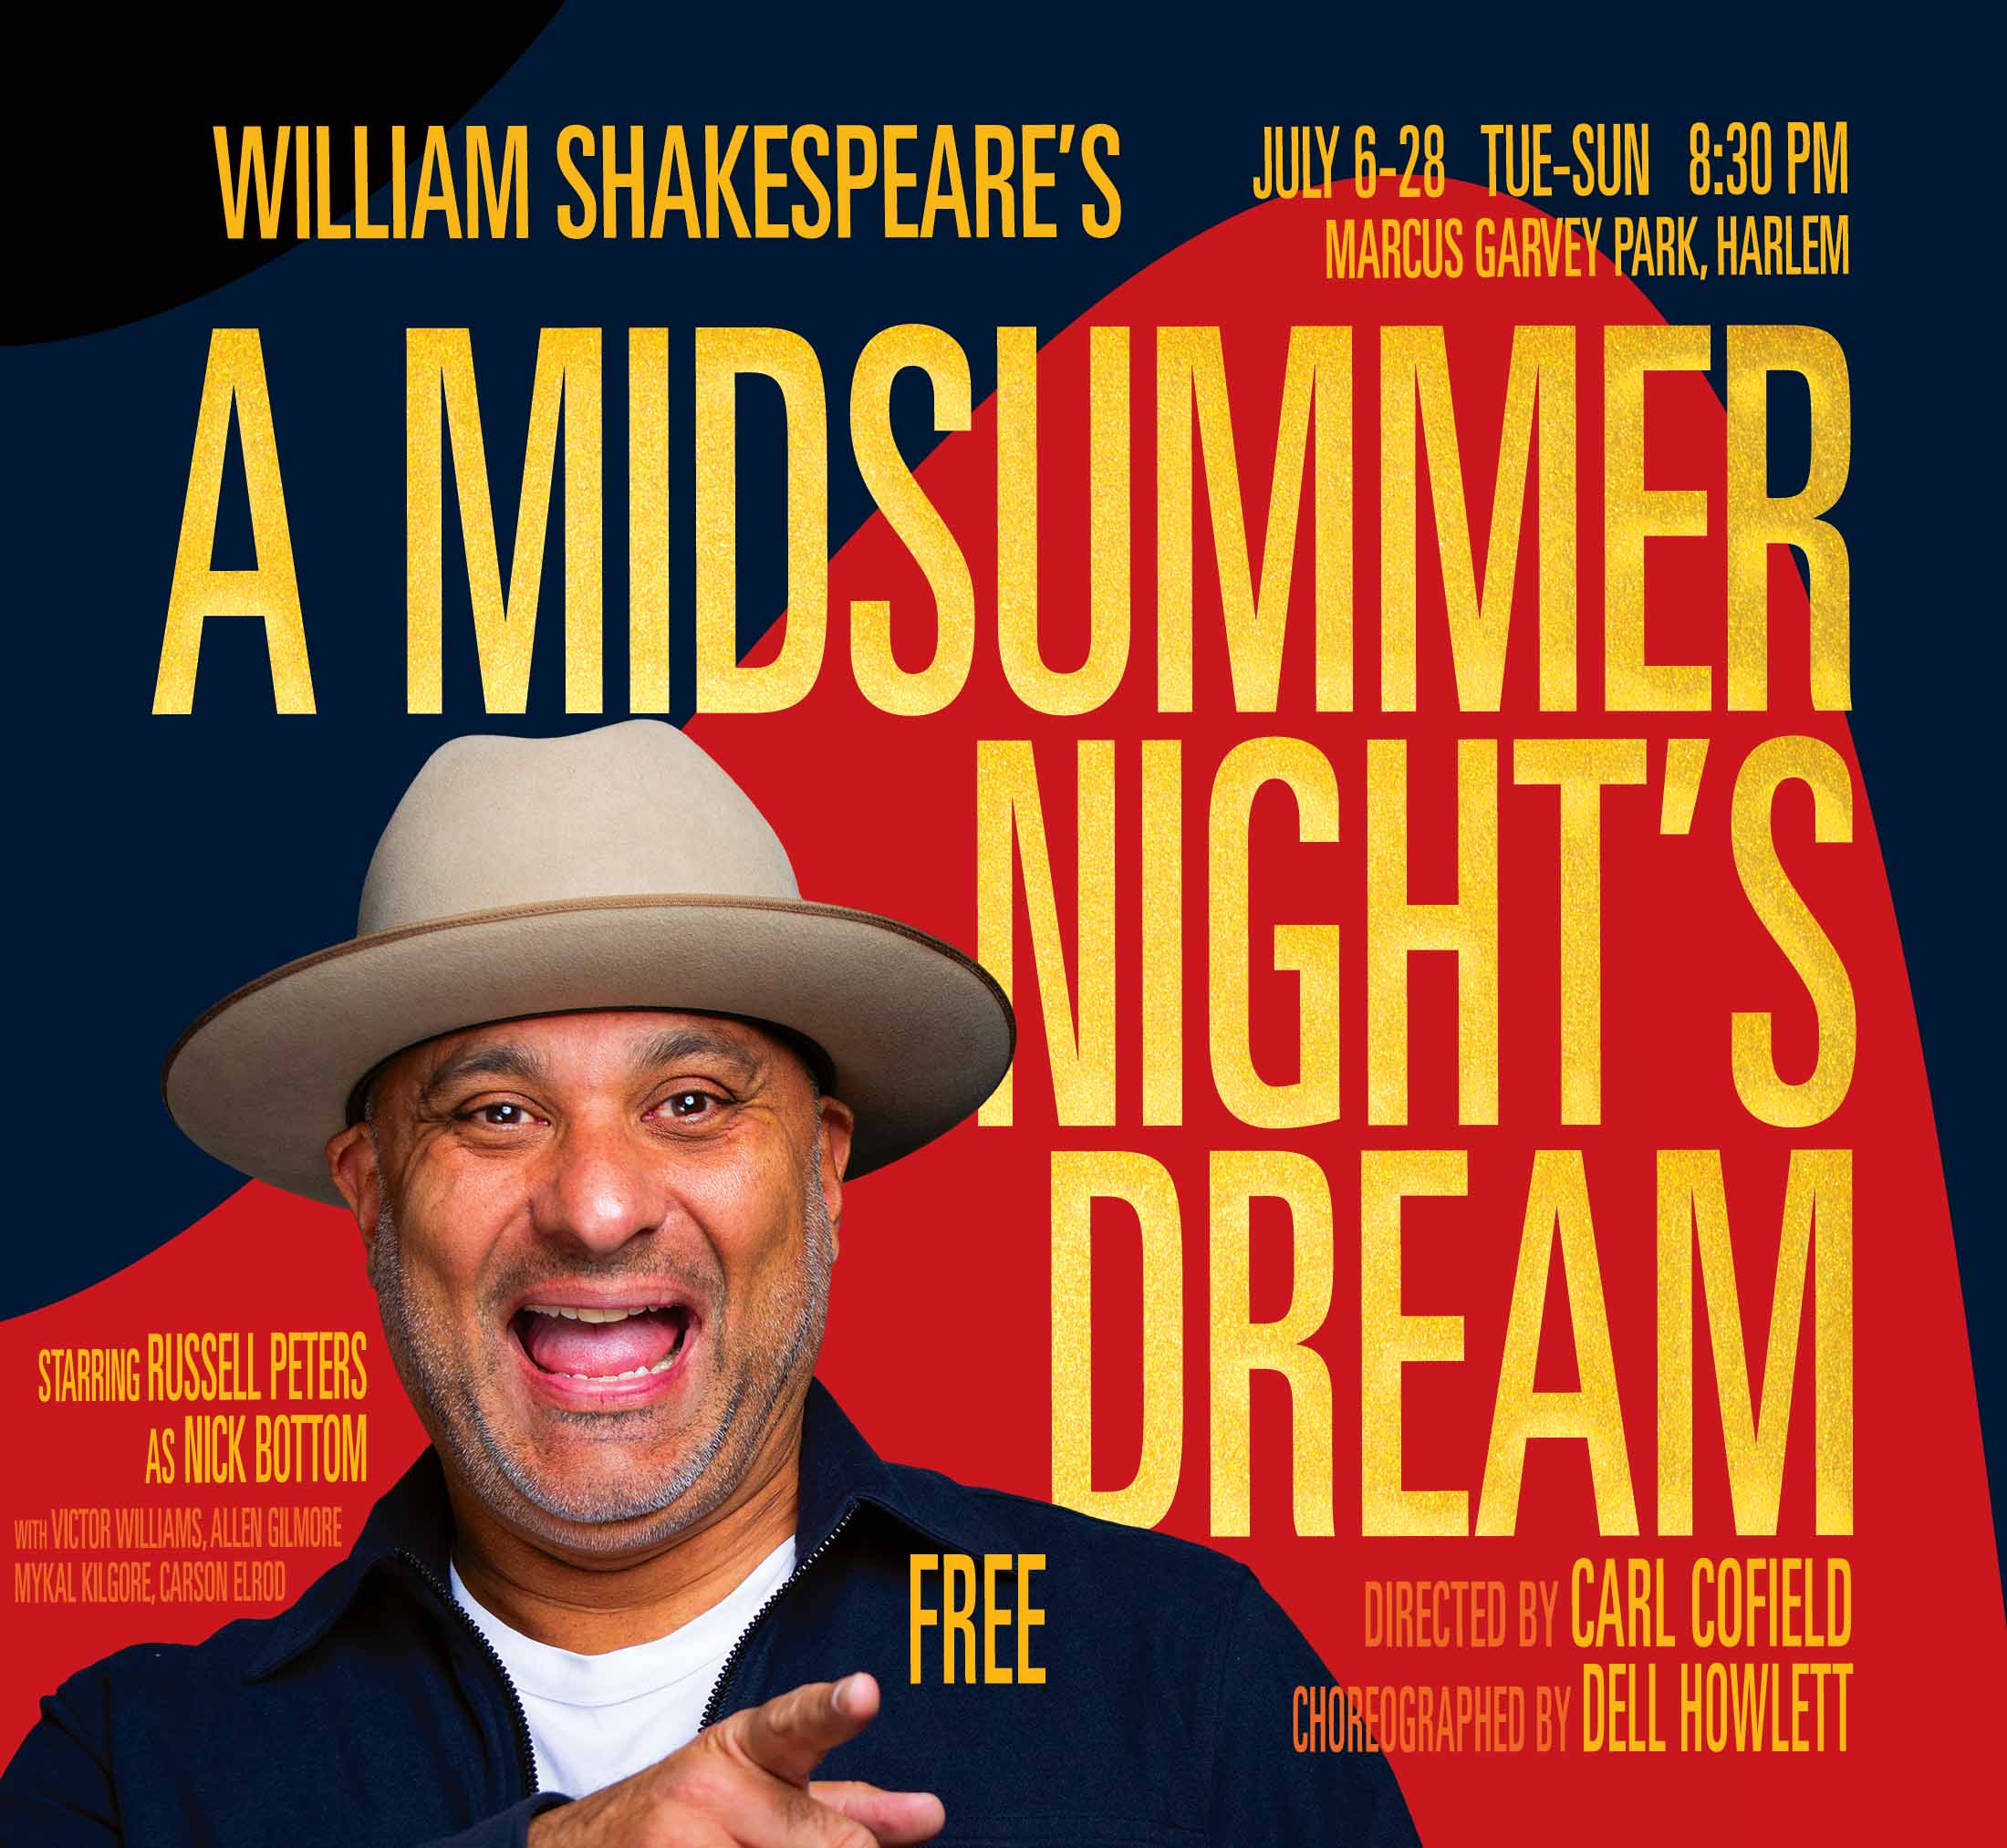 Poster art for CTH's "A Midsummer Night's Dream" featuring Russell Peters